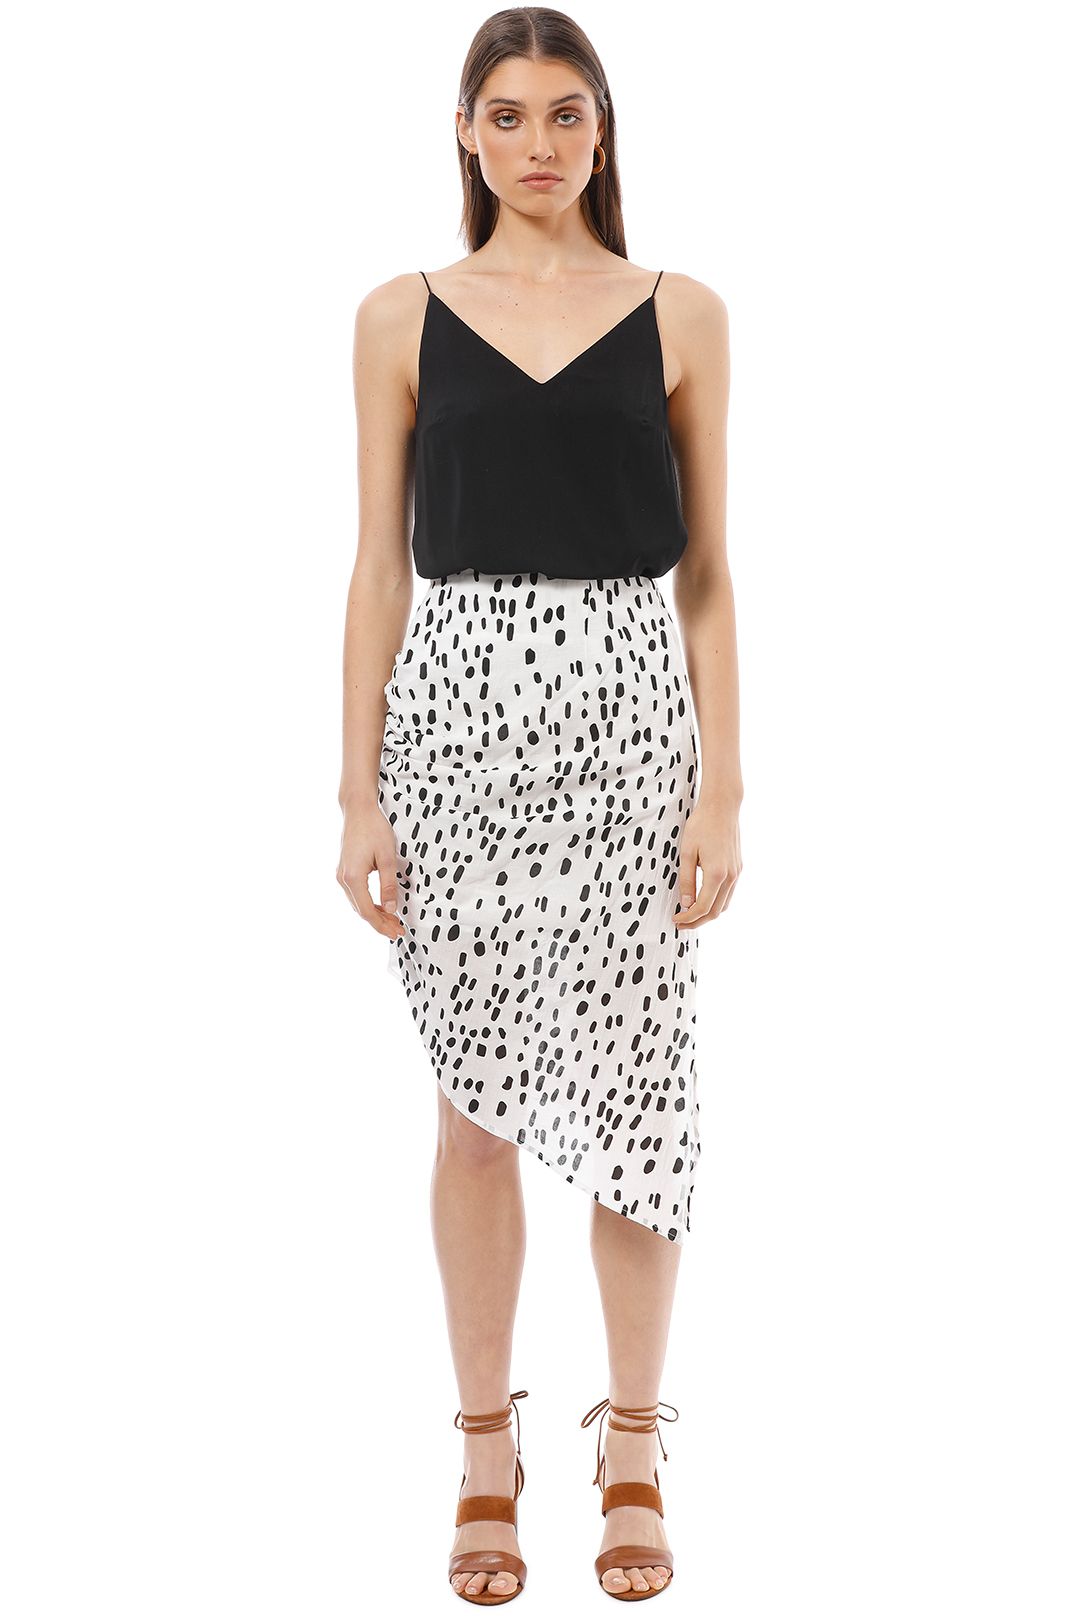 Friend of Audrey - Lucie Ruched Polka Dot Skirt - Black White - Front